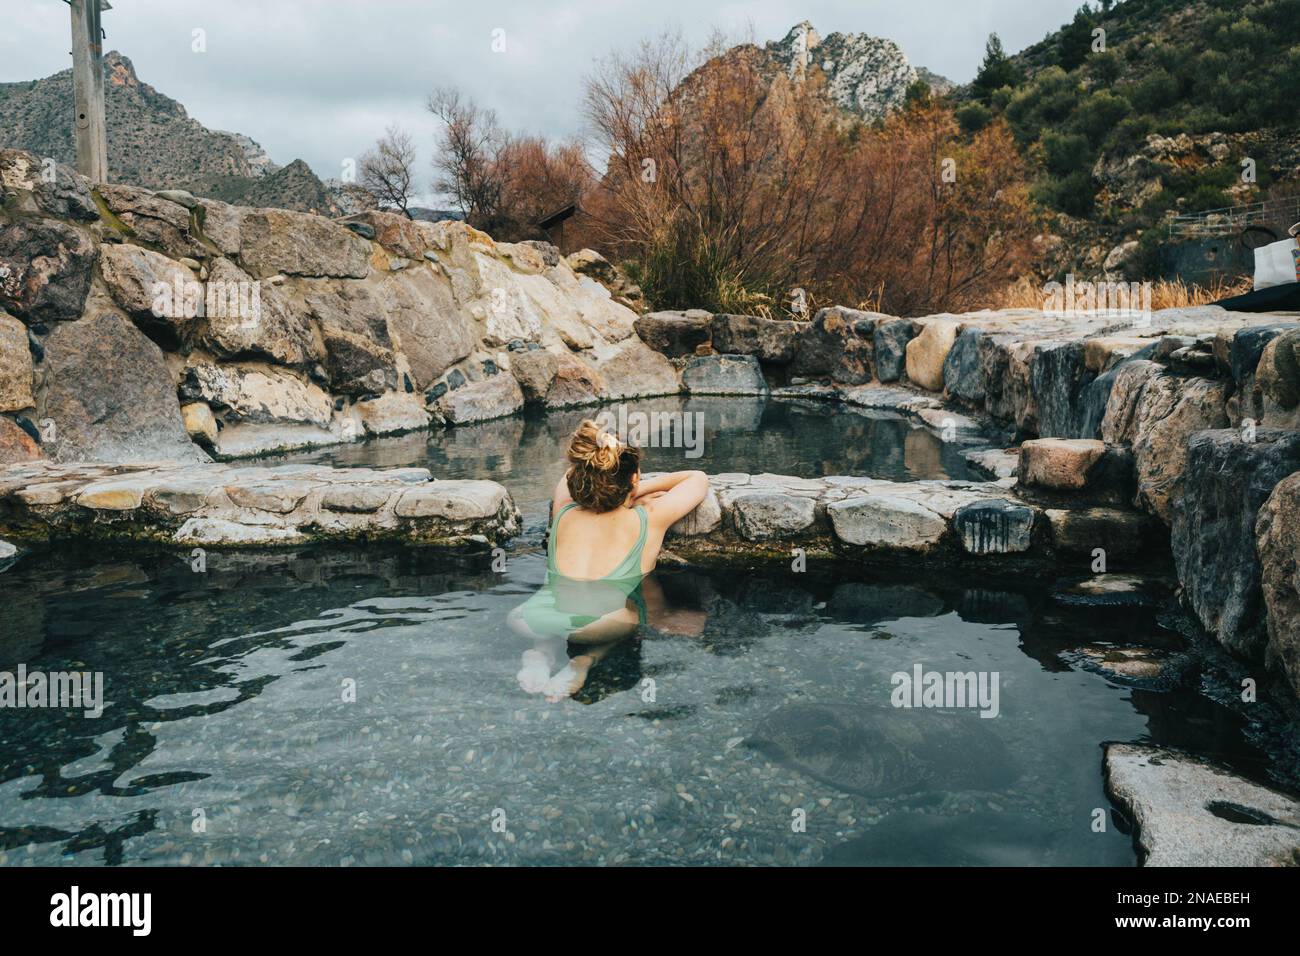 Portrait of woman in natural hot springs relaxing Stock Photo